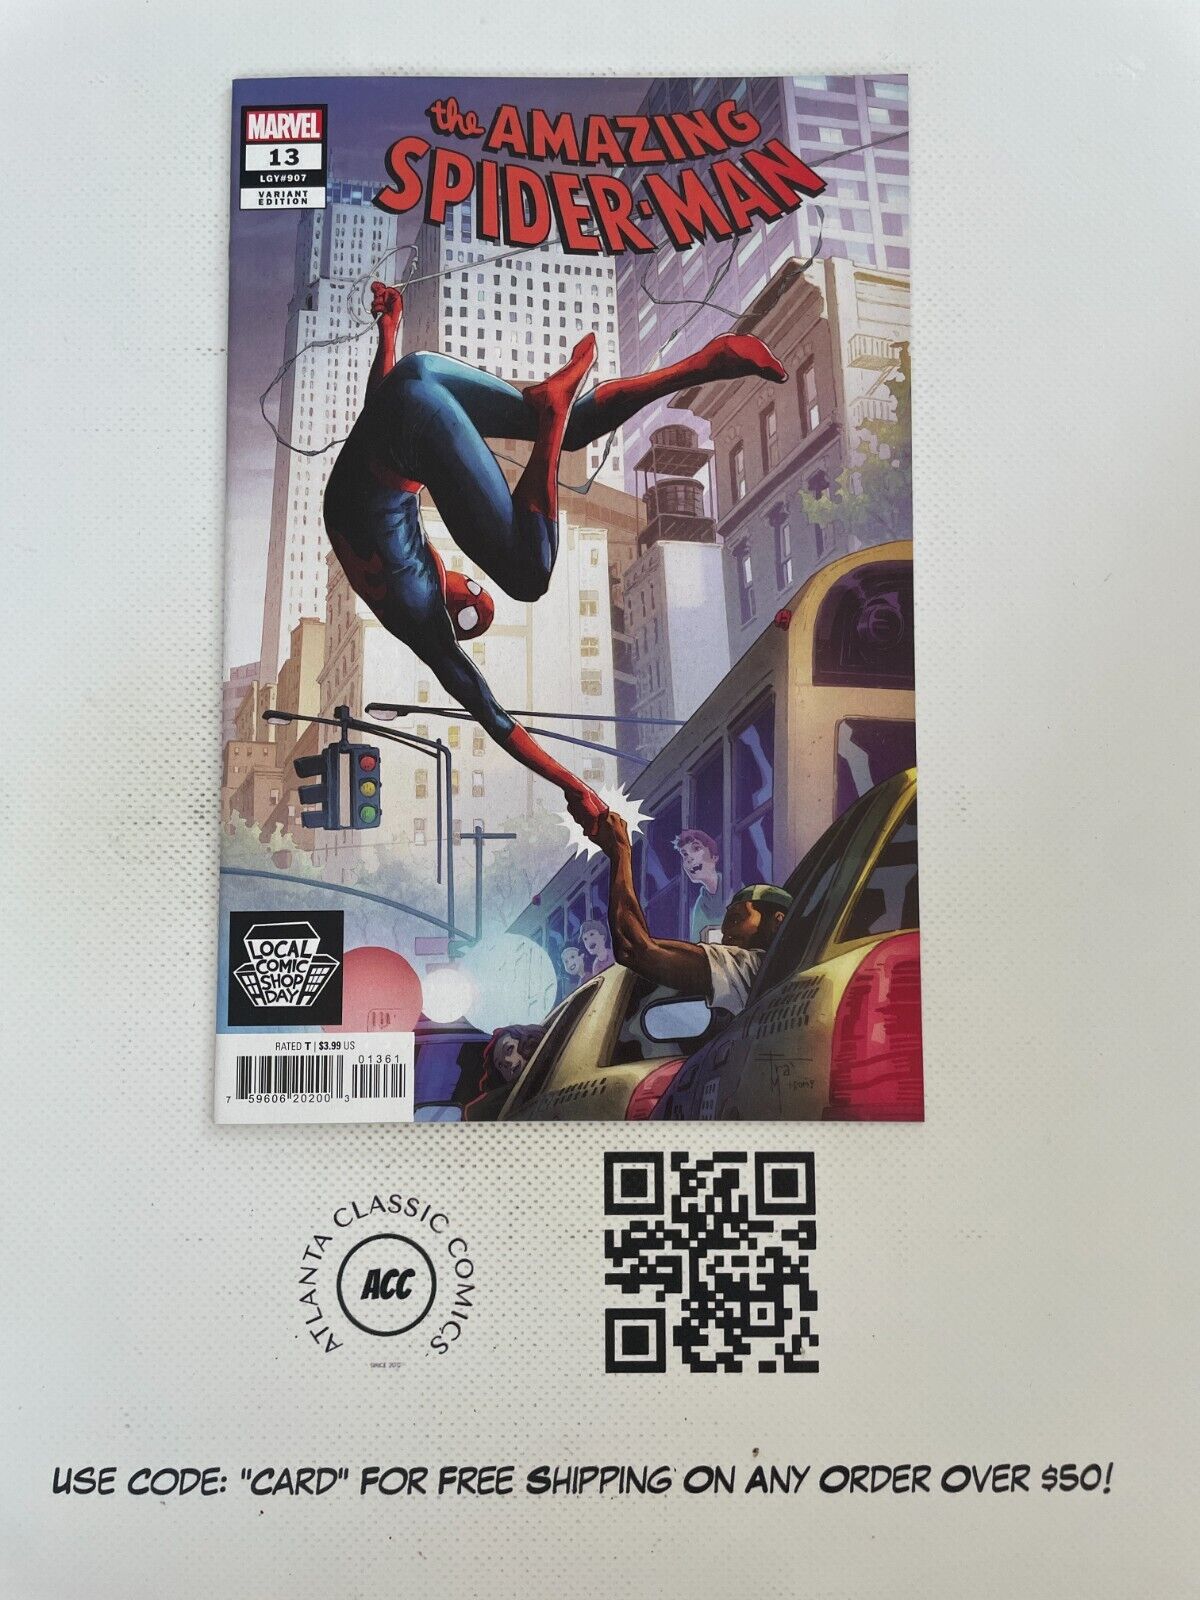 The Amazing Spider-Man # 13 LGY # 907 NM VARIANT COVER Marvel Comic Book 10 J202